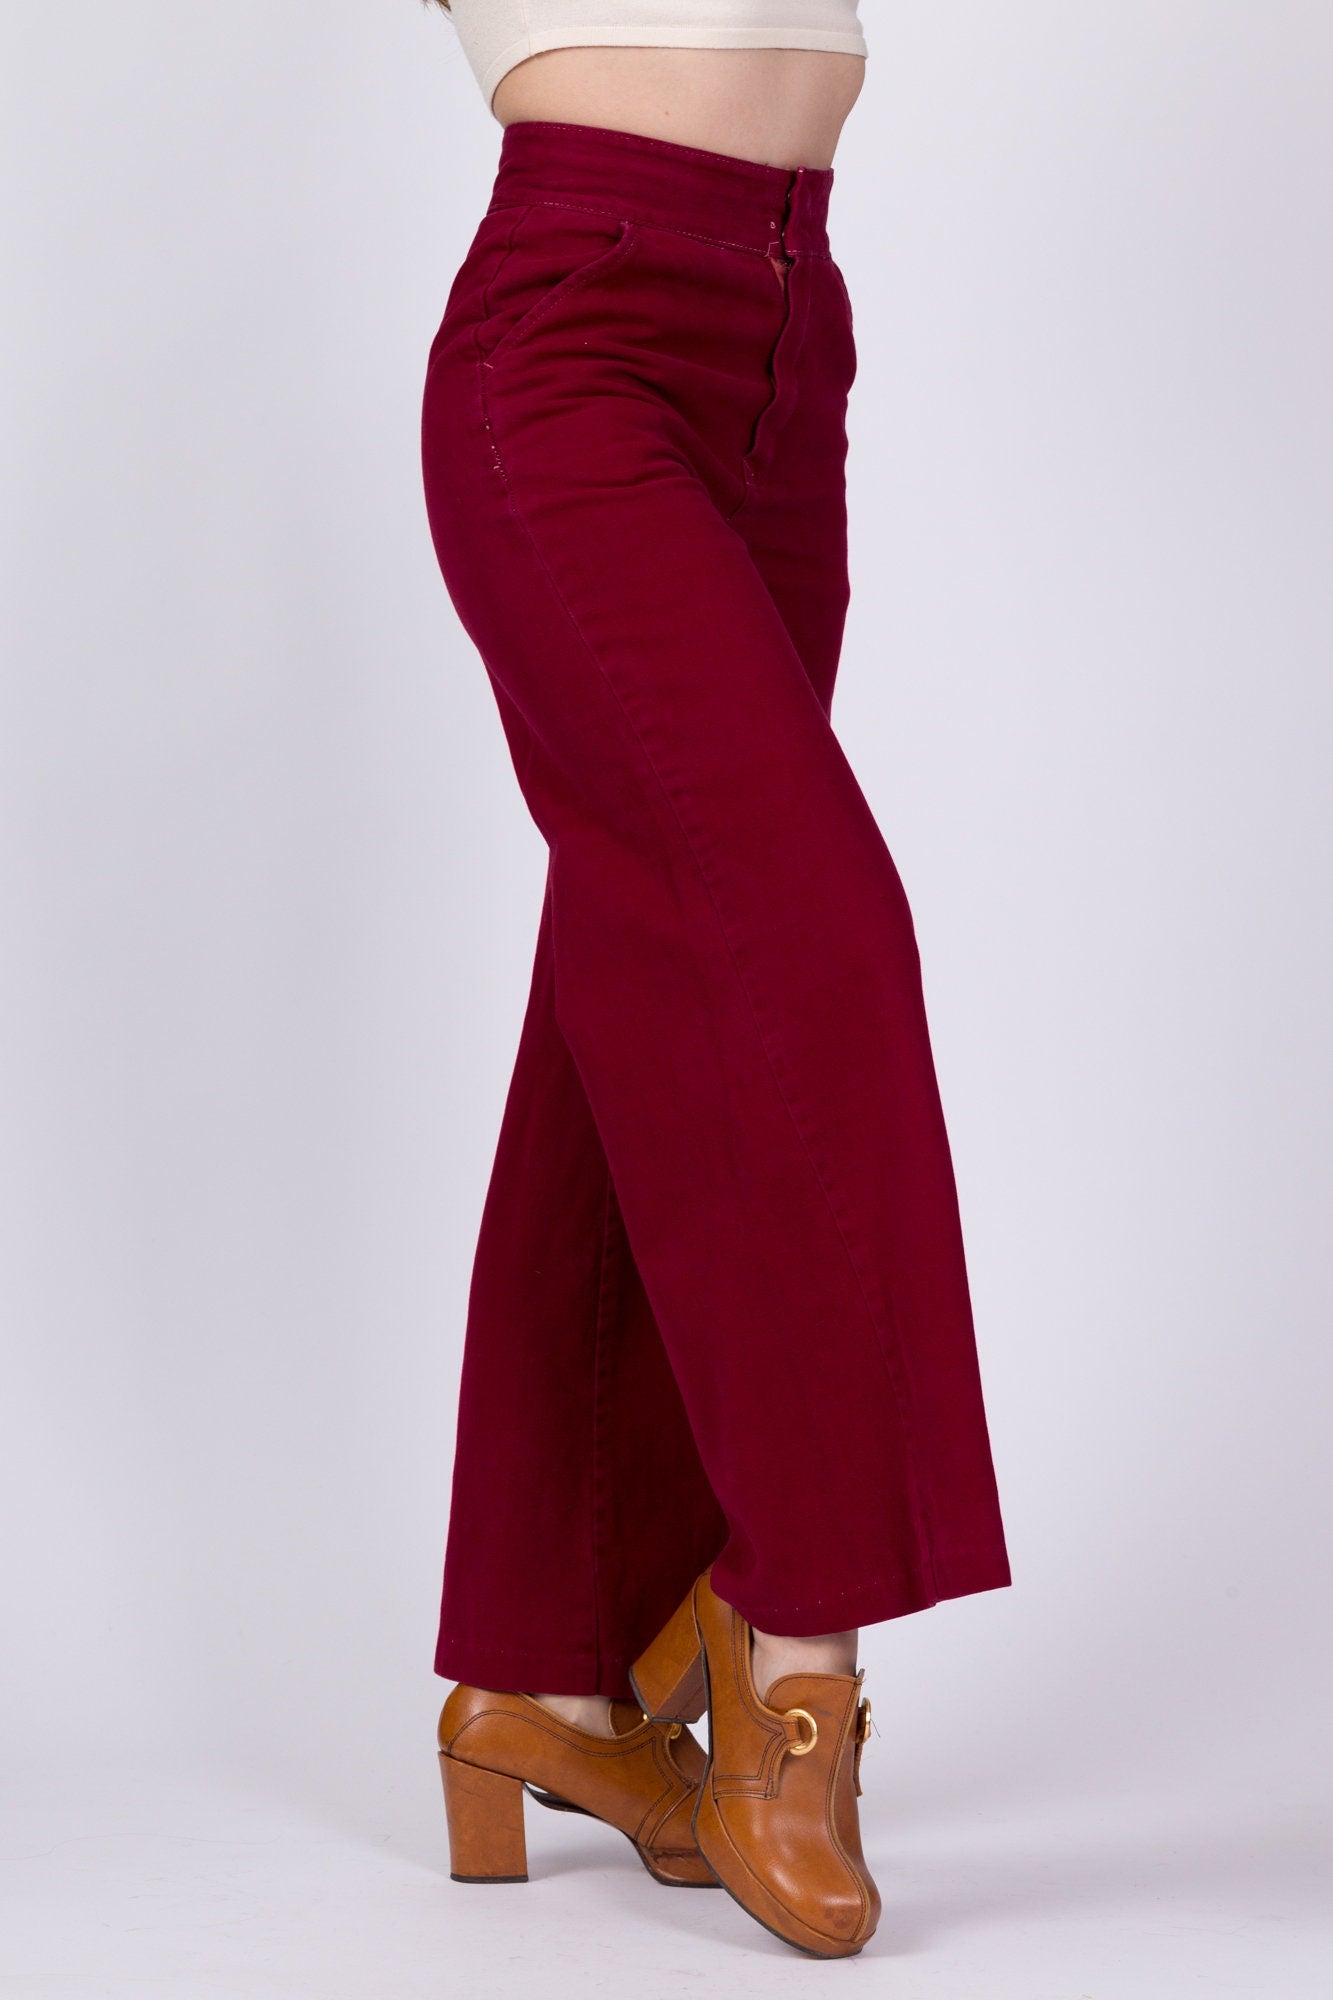 70s Wine Red High Waist Flared Cotton Twill Pants - Extra Small, 23" 